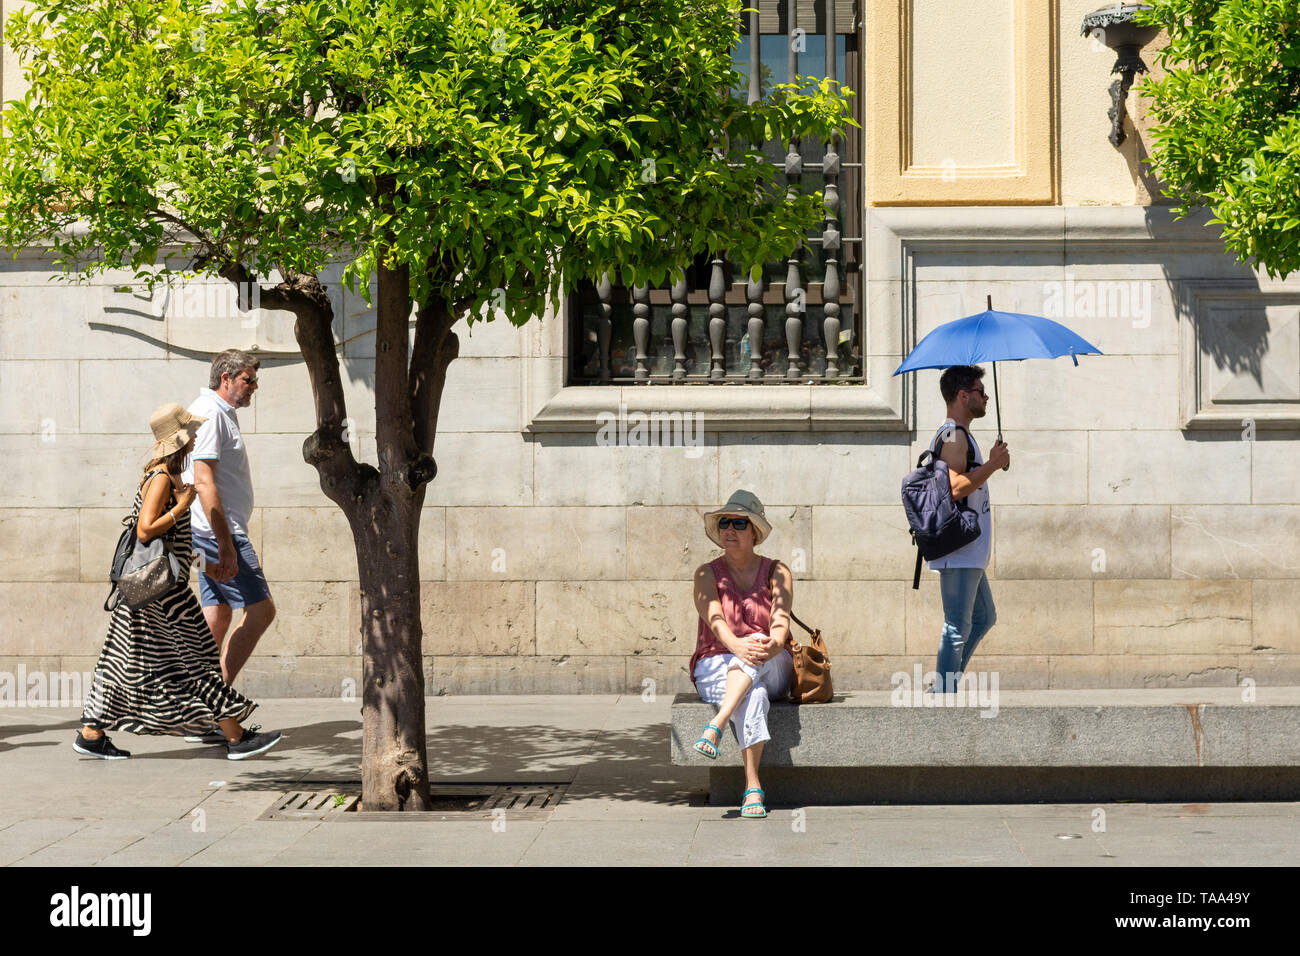 Woman sitting on a bench in Seville, Andalusia region, Spain. A man with a blue sun umbrella walking by. Stock Photo